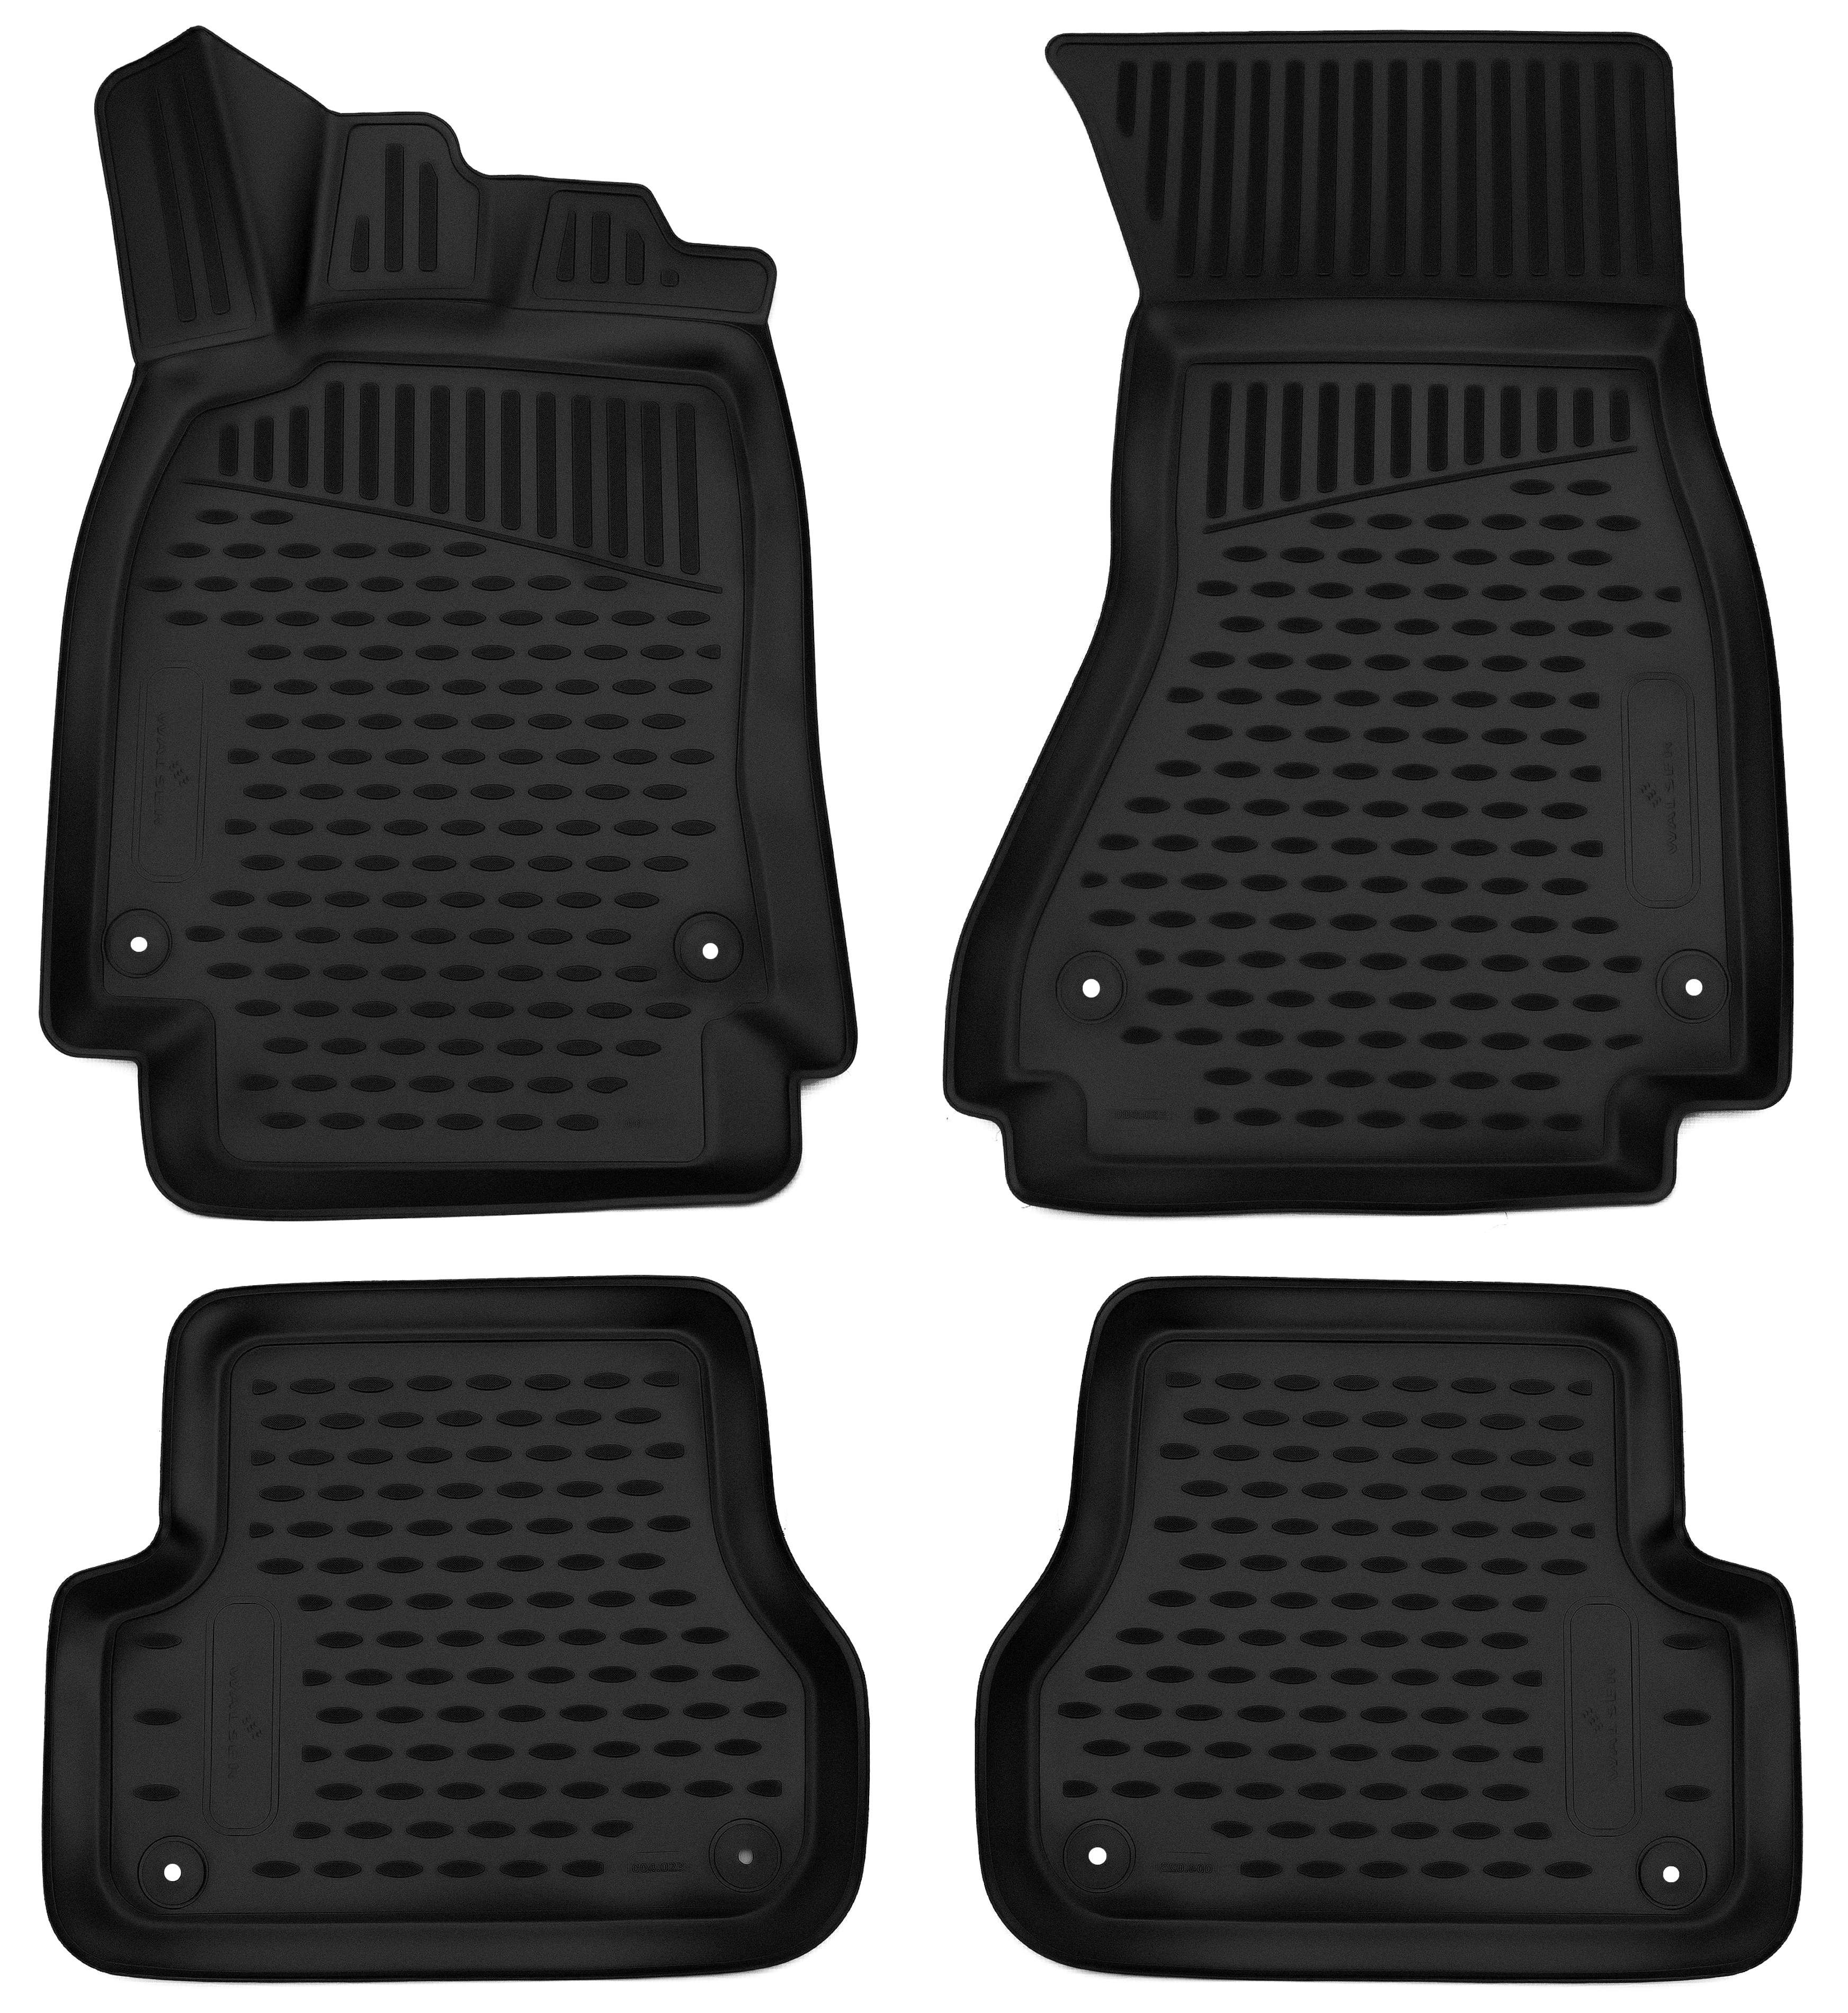 XTR Rubber Mats for Audi A6 Sedan 11/2010 - 09/2018, without compartment under drivers seat